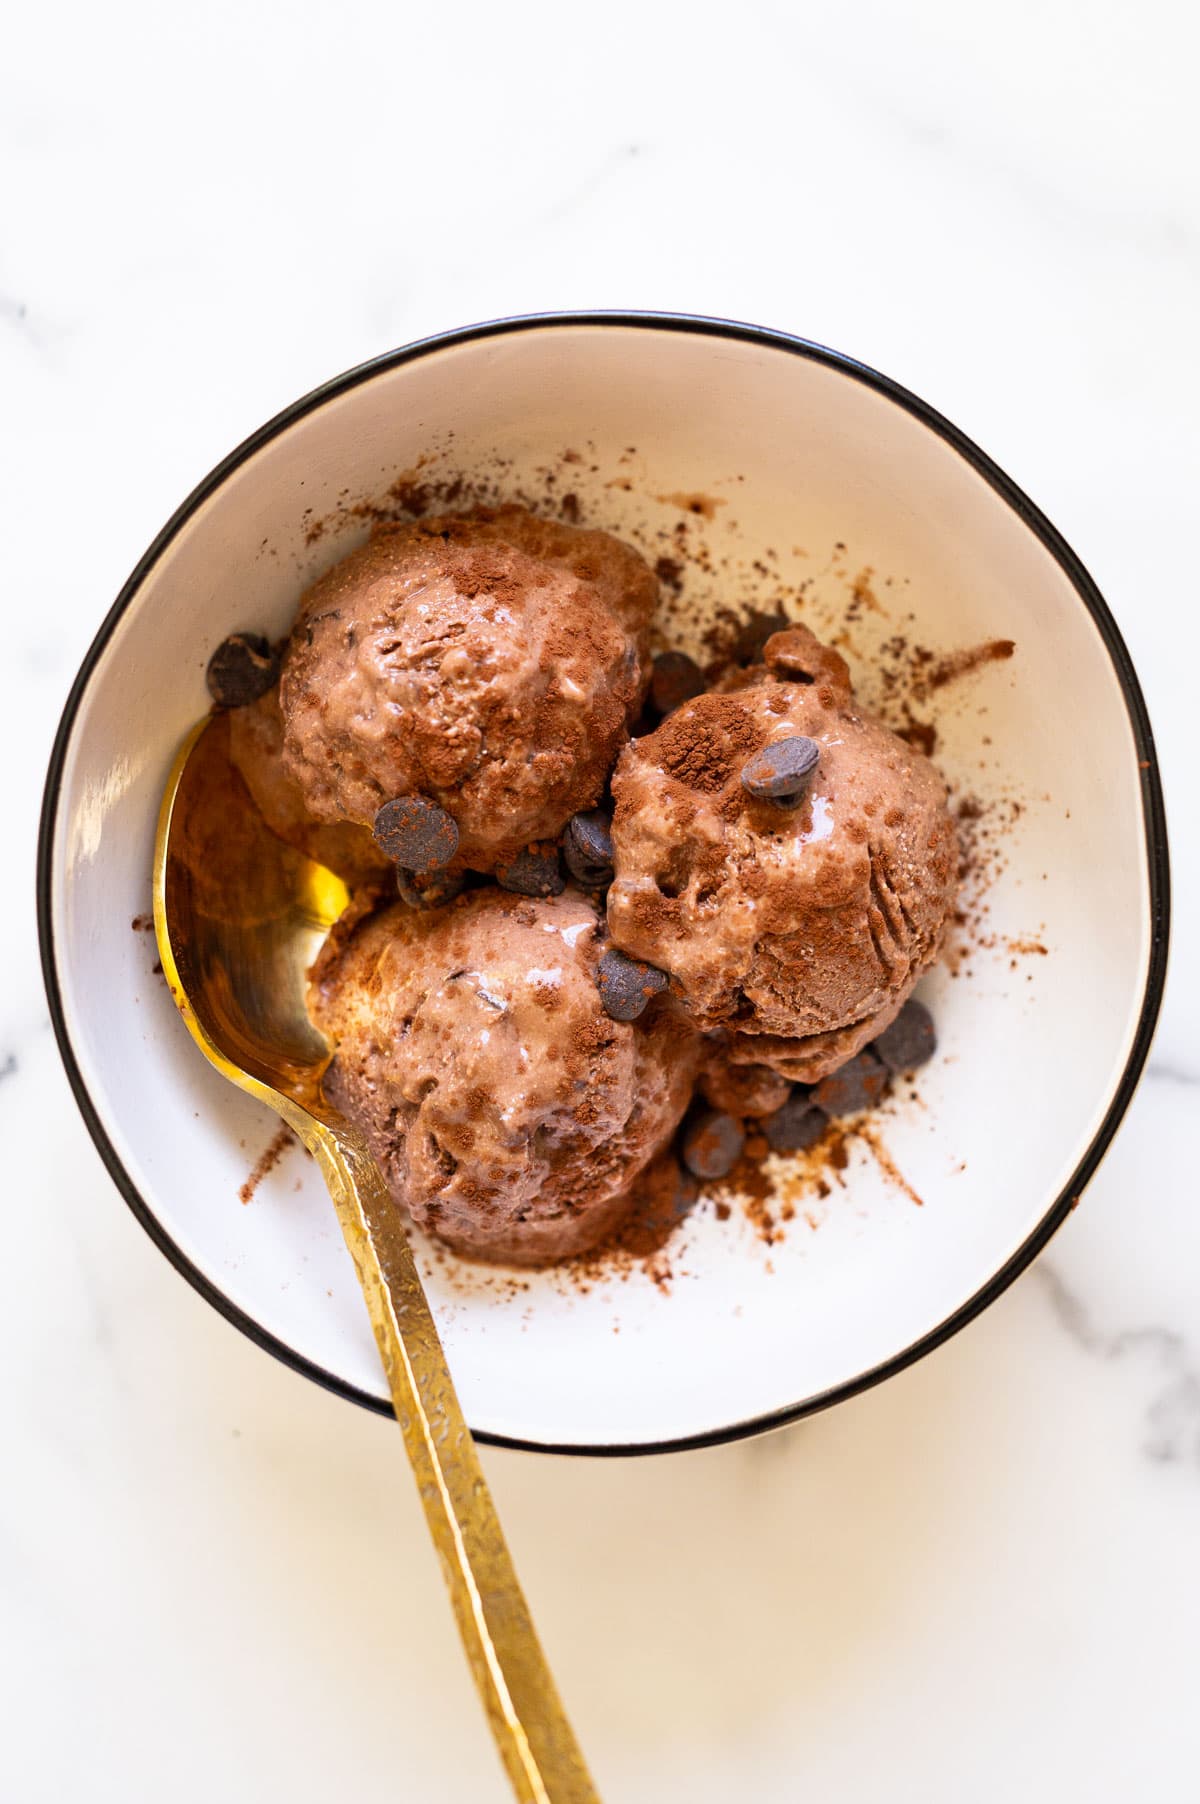 Chocolate cottage cheese ice cream served with chocolate chips and cacao powder in a bowl.